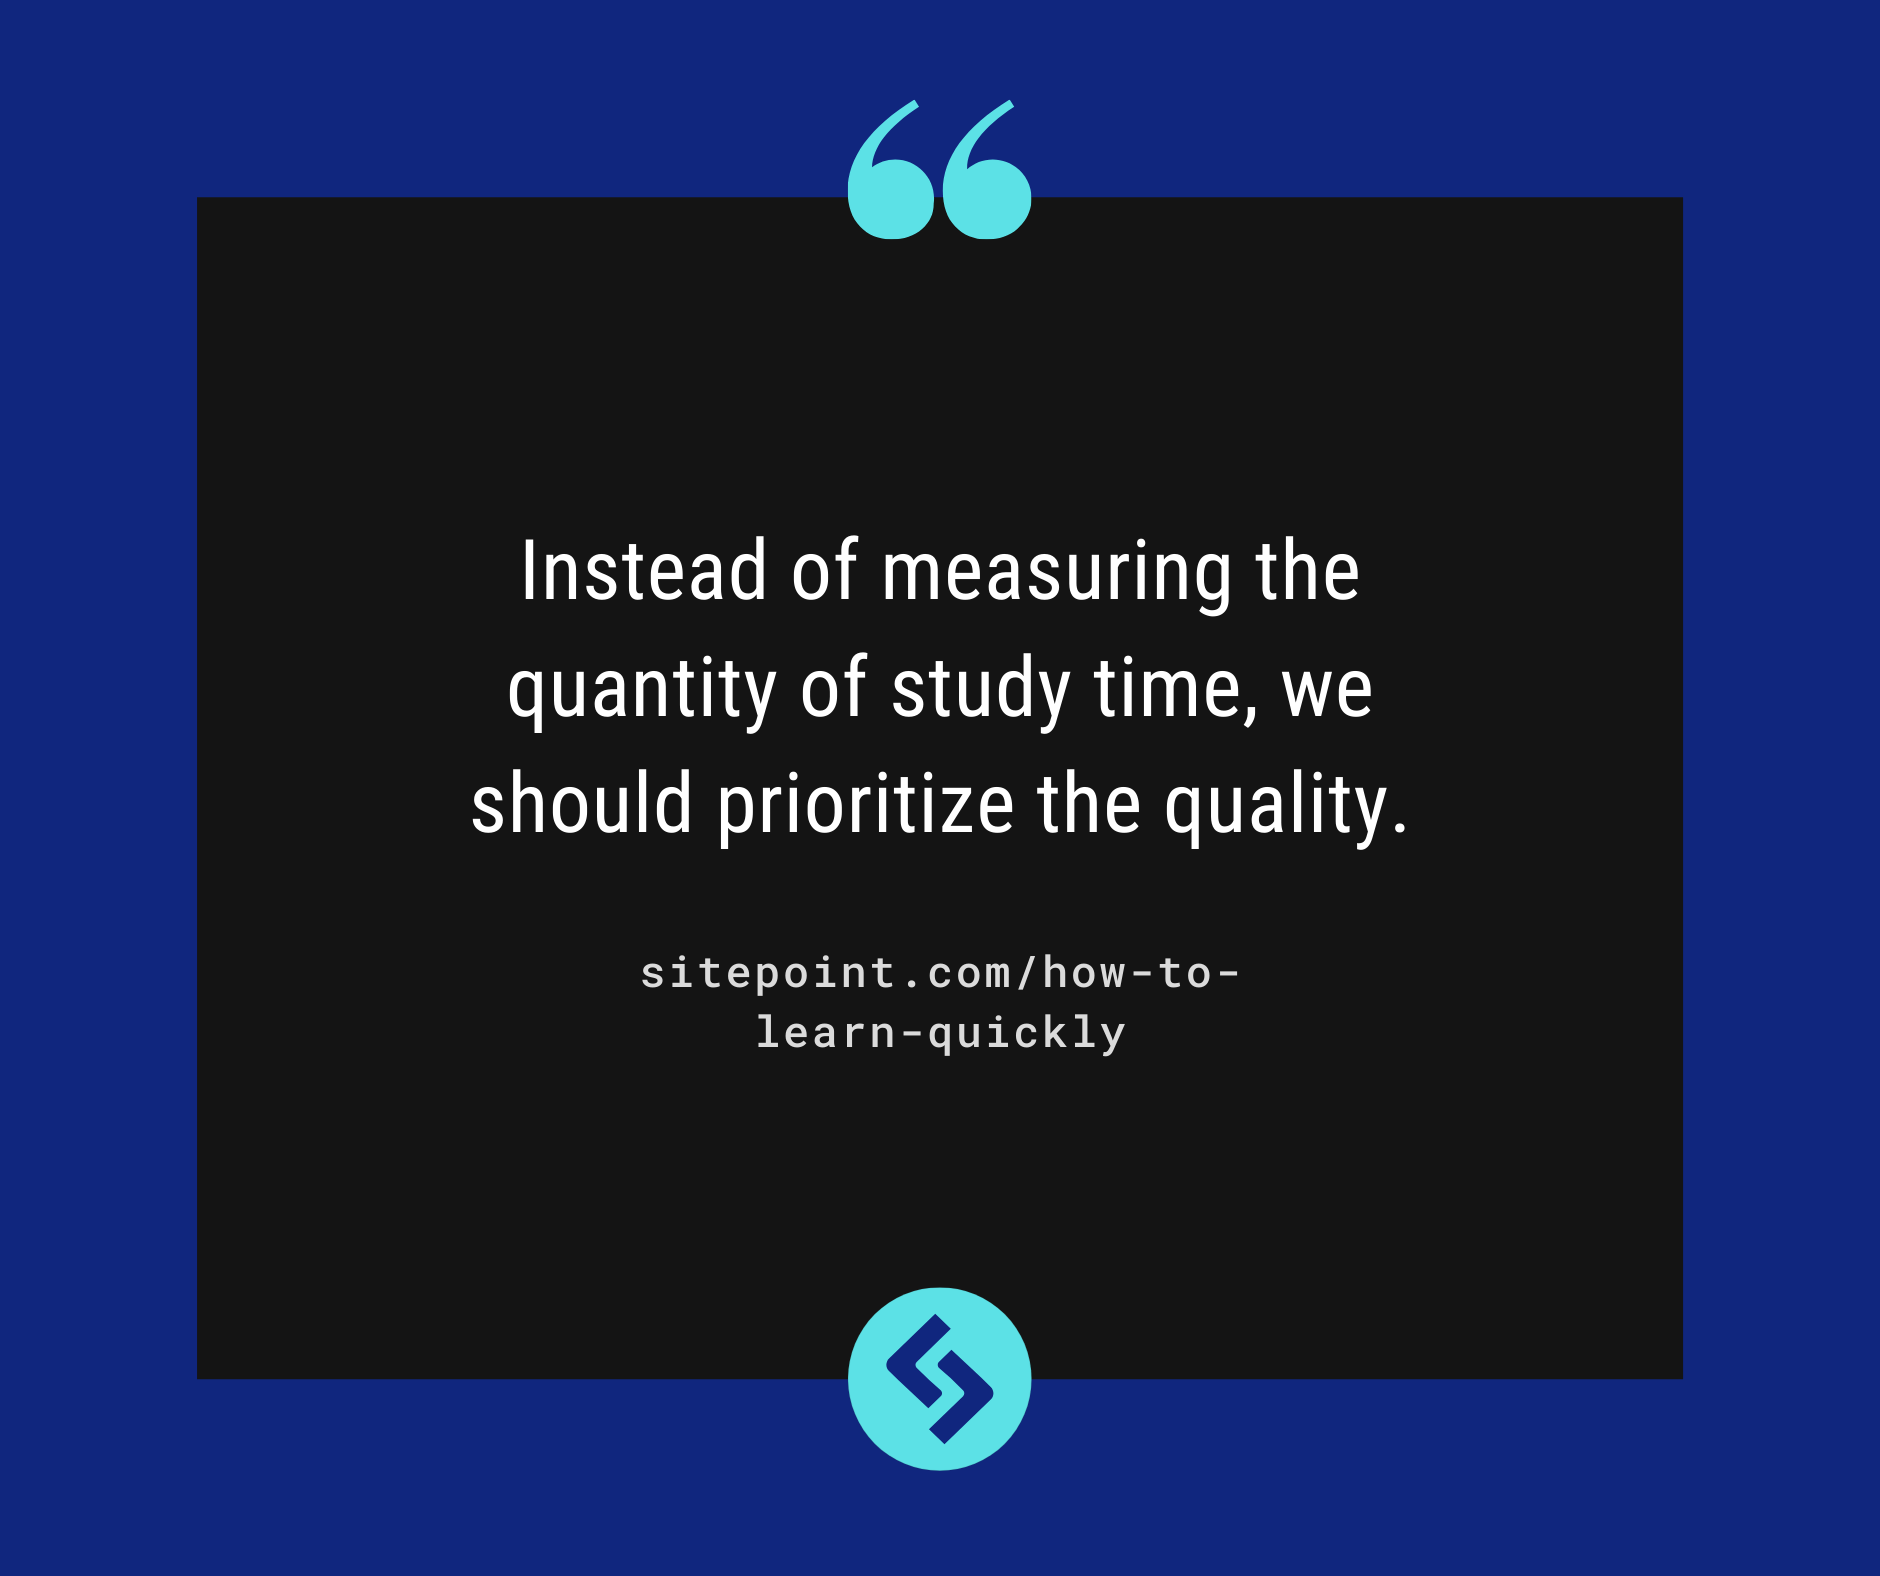 Instead of measuring the quantity of study time, we should prioritize the quality.